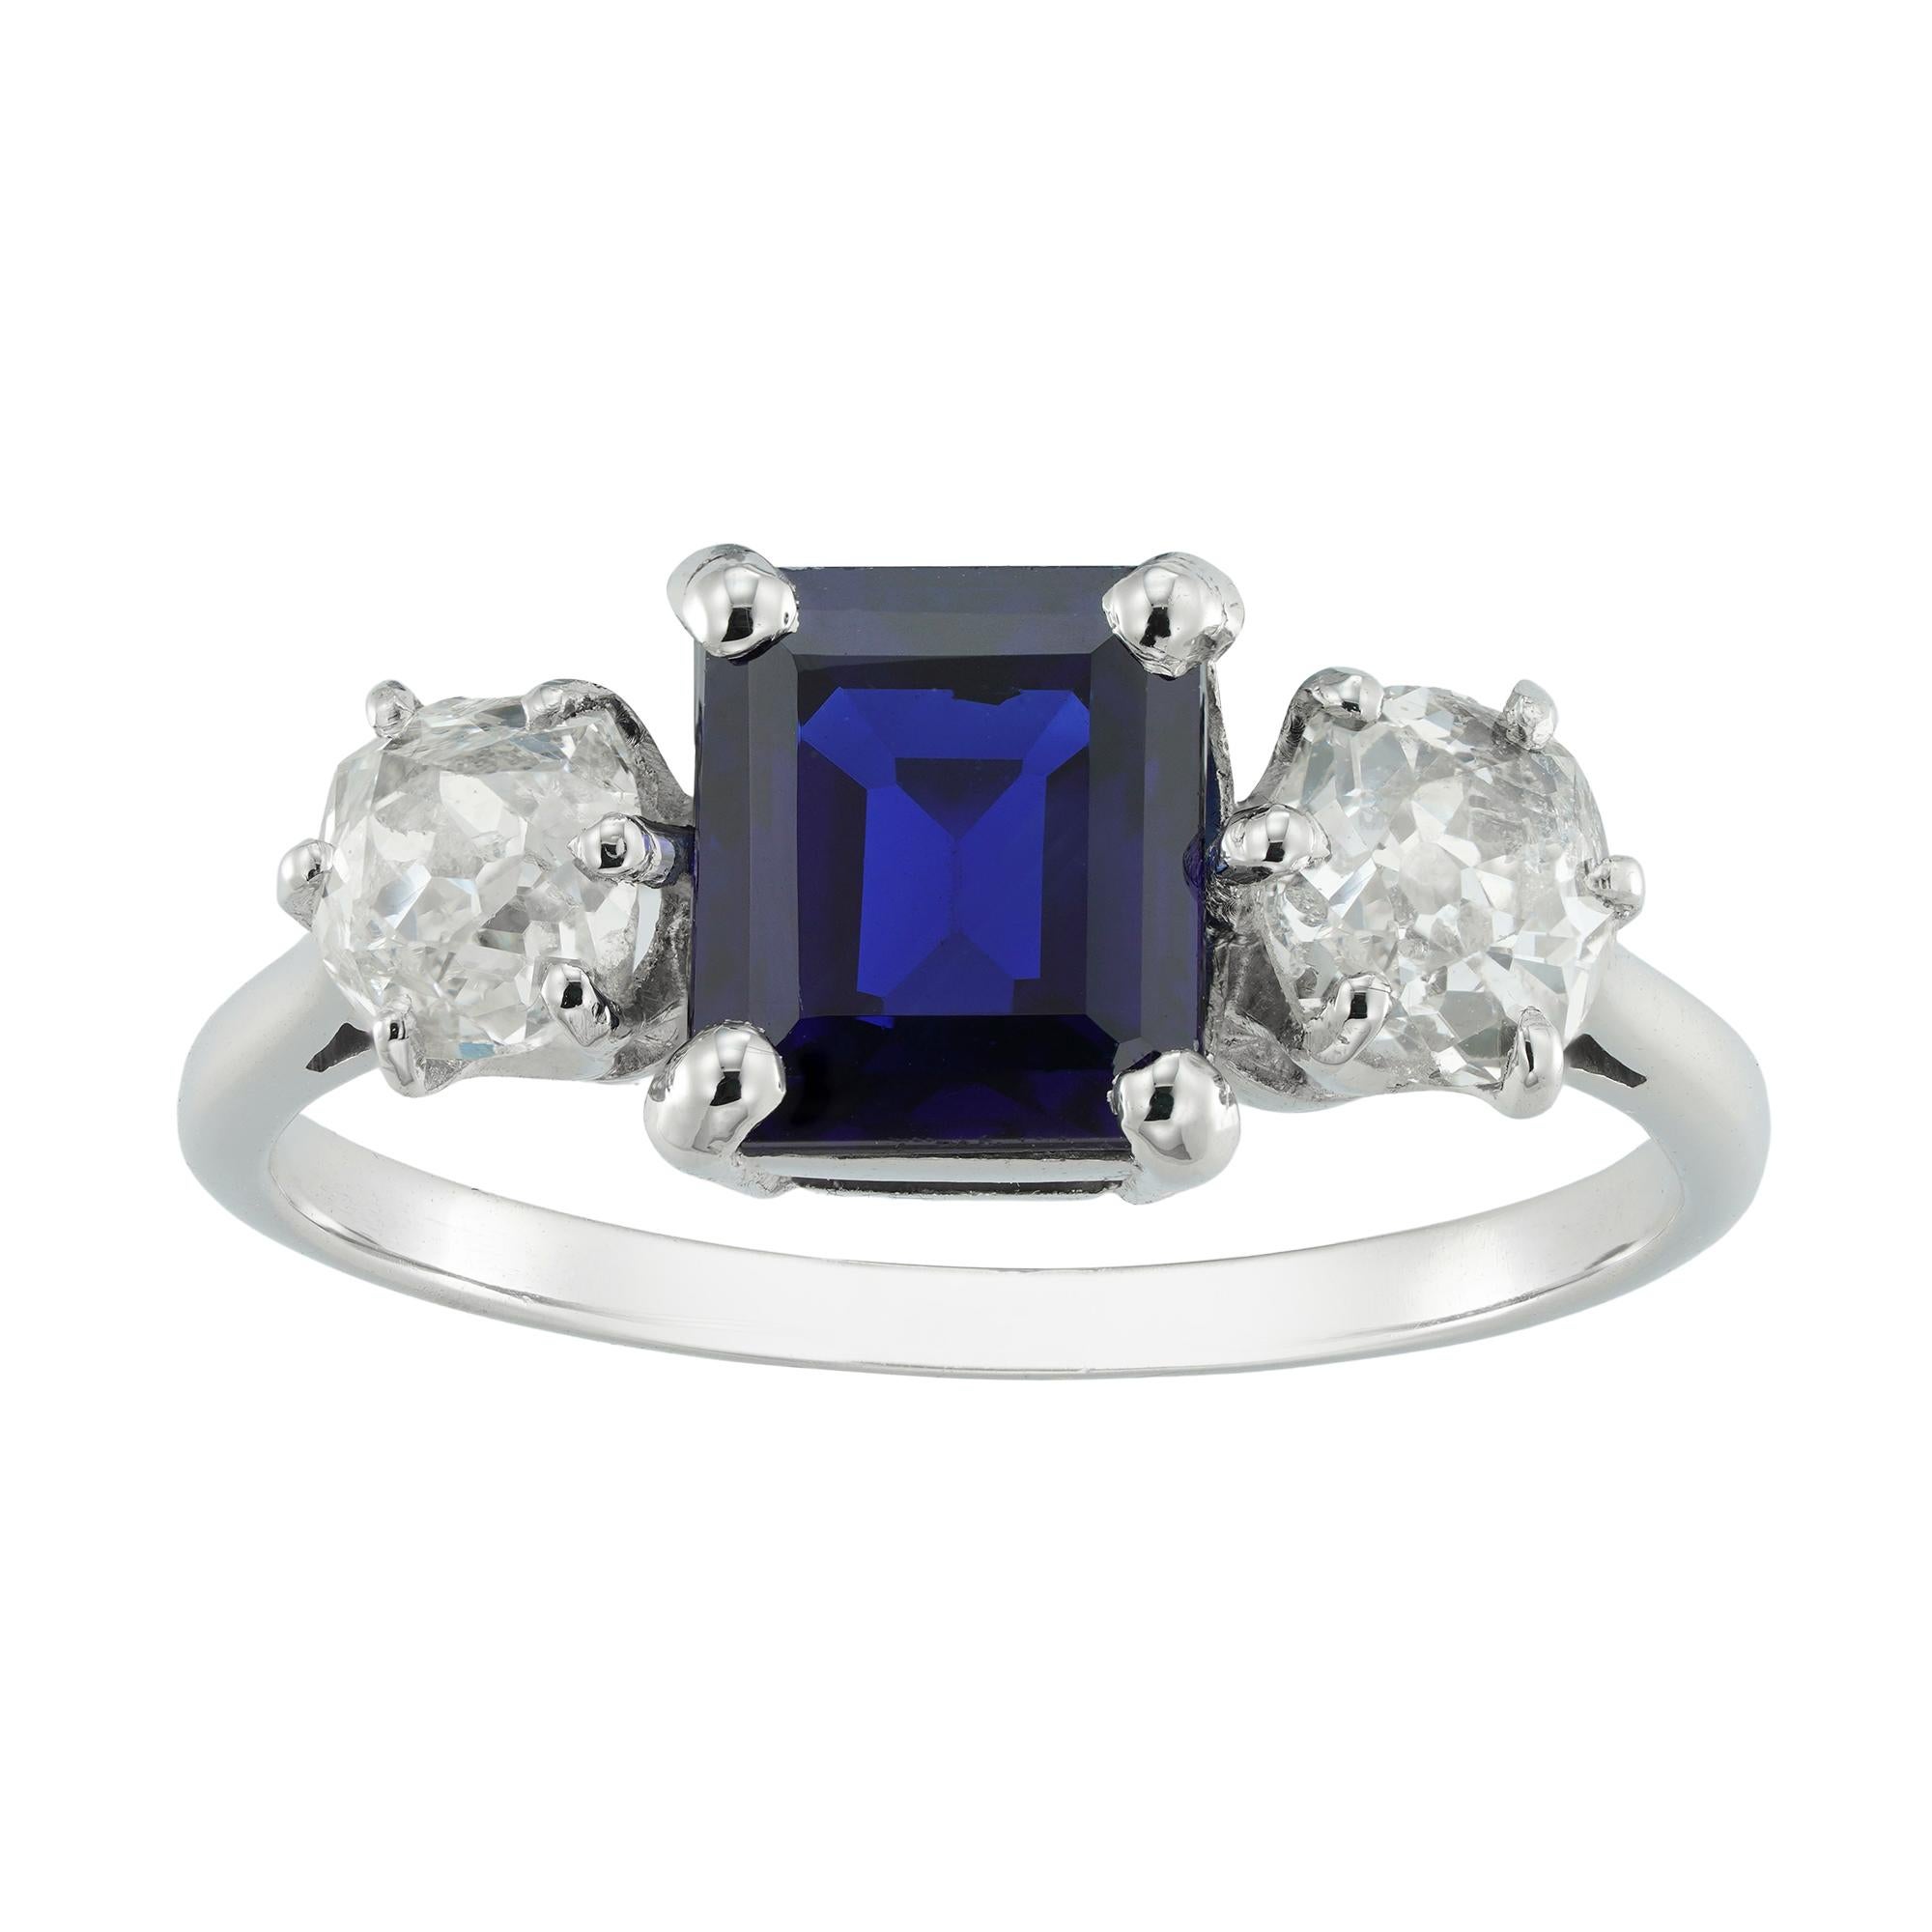 A three stone sapphire and diamond ring, the square-cut sapphire weighing 1.60 carats, accompanied by GCS report stating to be of basaltic origin with no indication of heating, set between two old-cut diamonds, the one weighing 0.32 carats and the